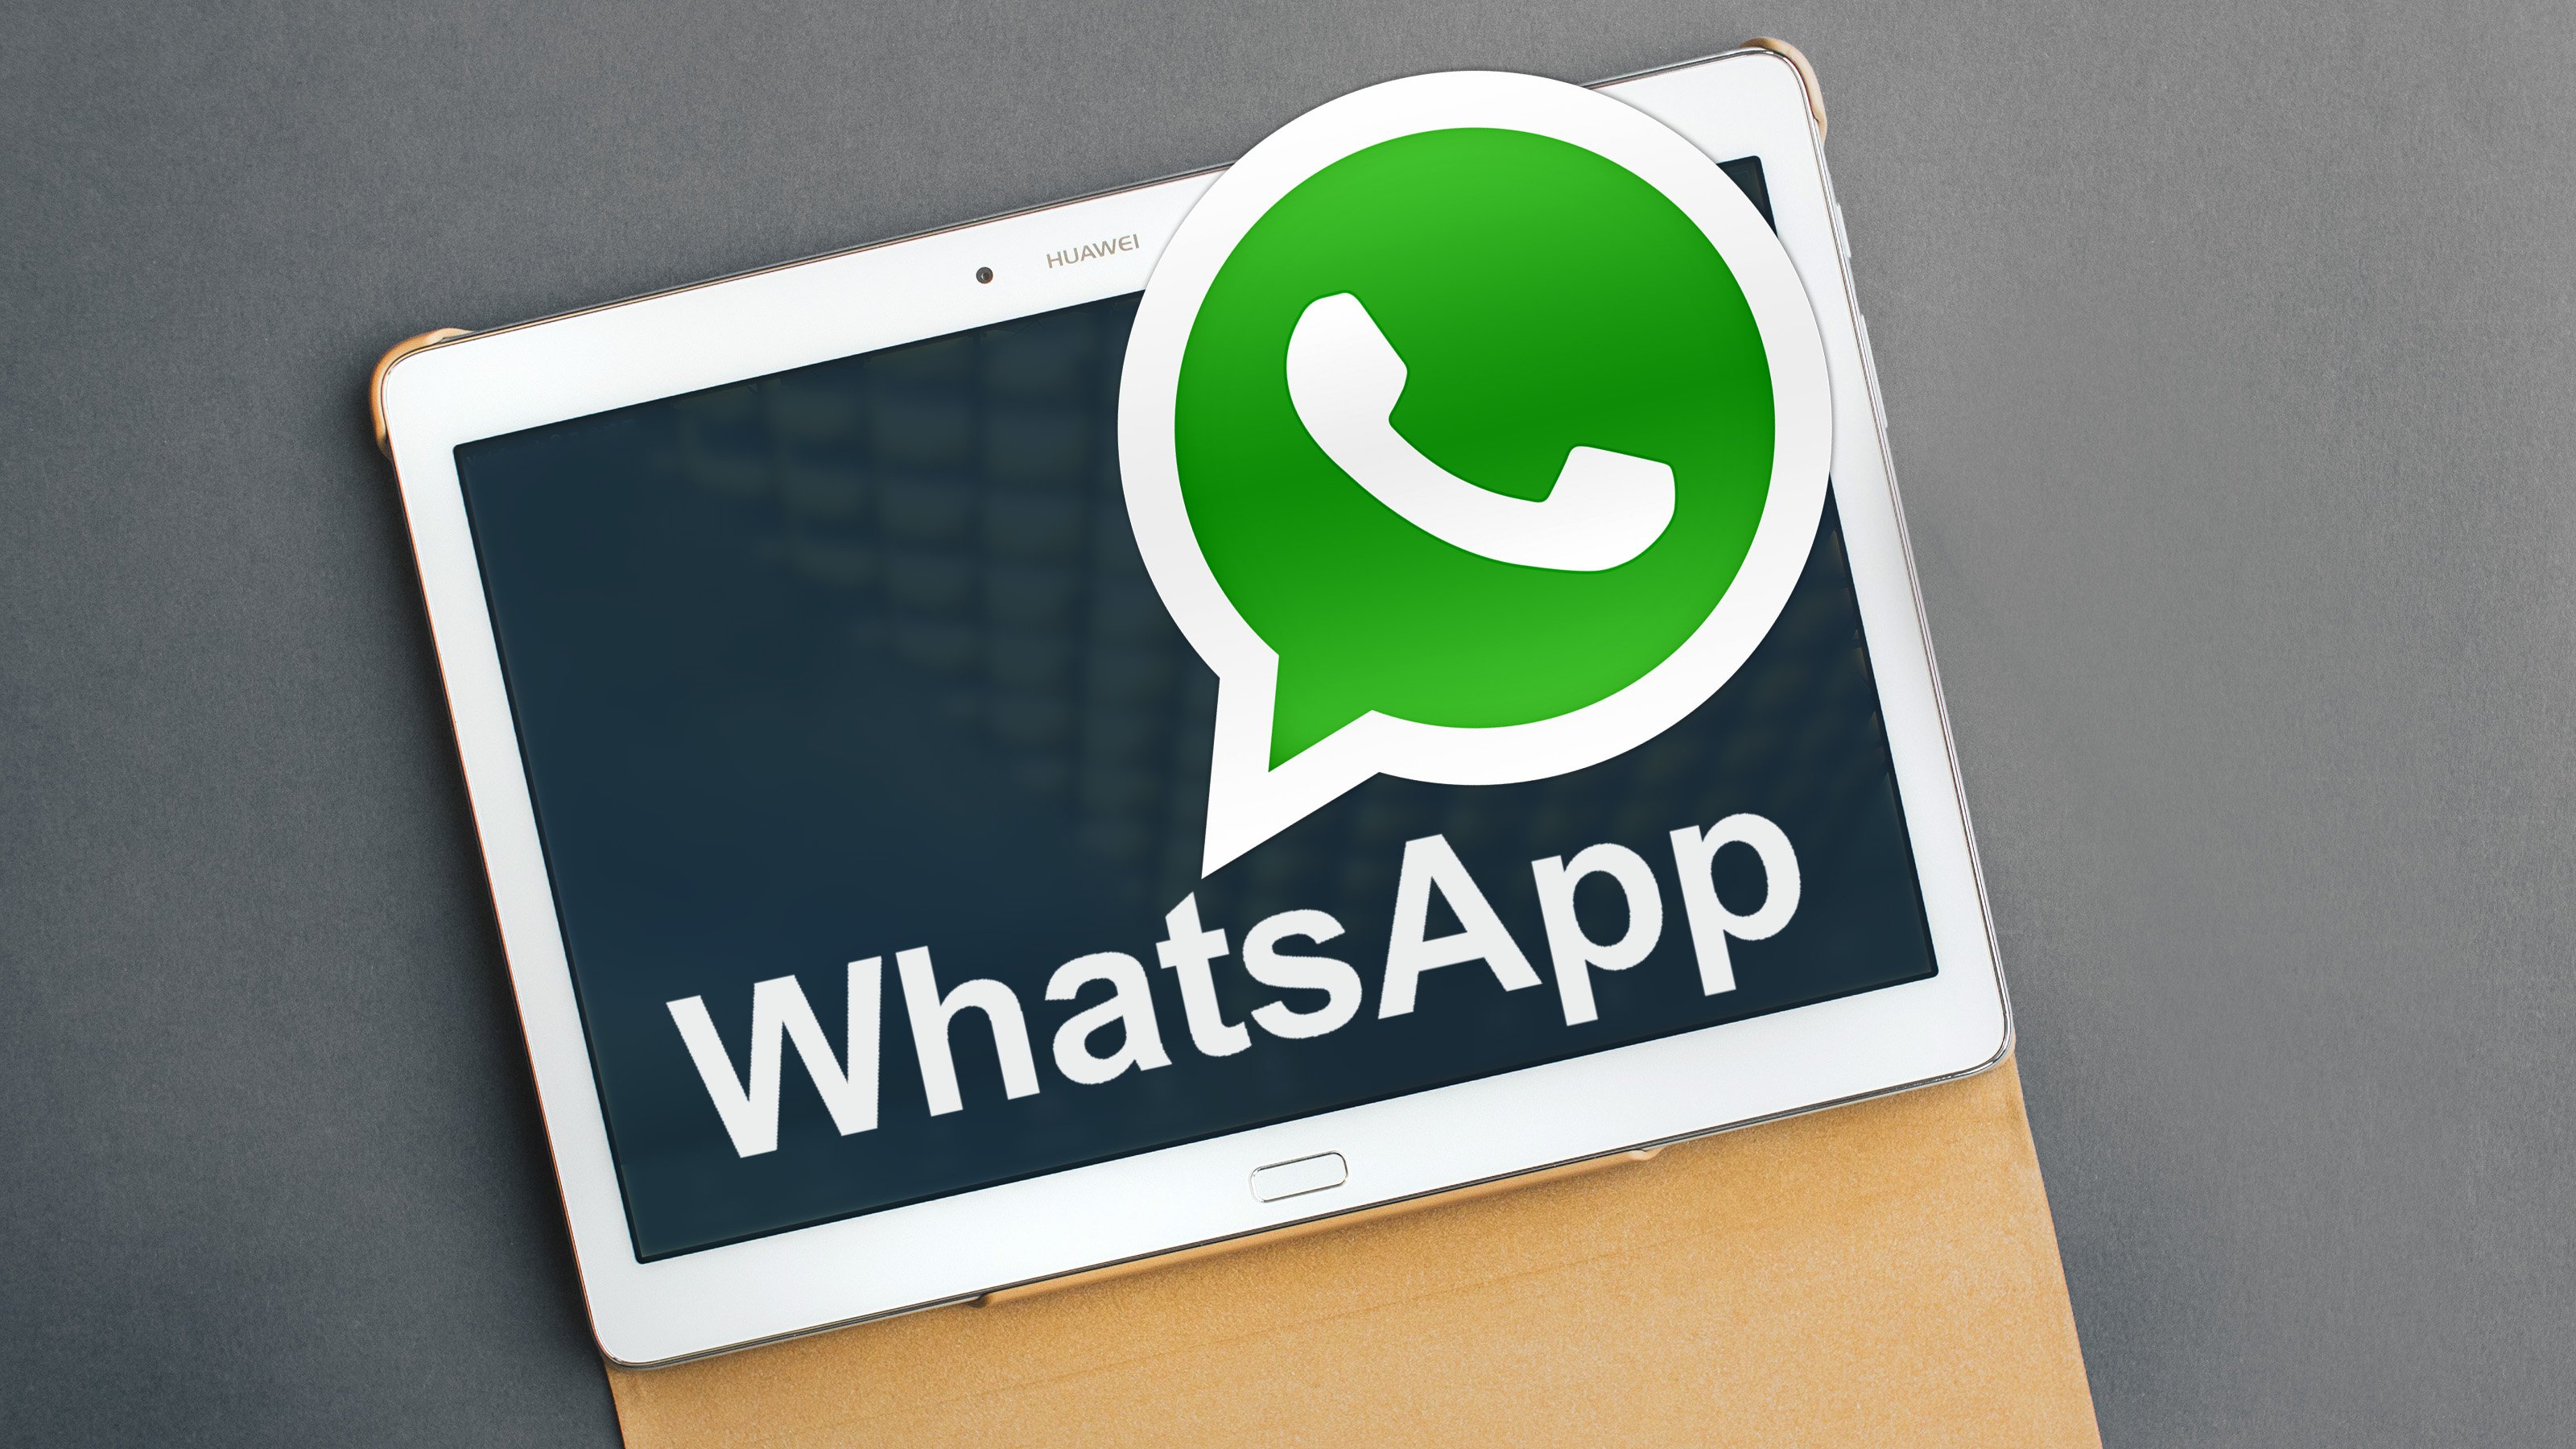 google play store app install whatsapp download for tablet free